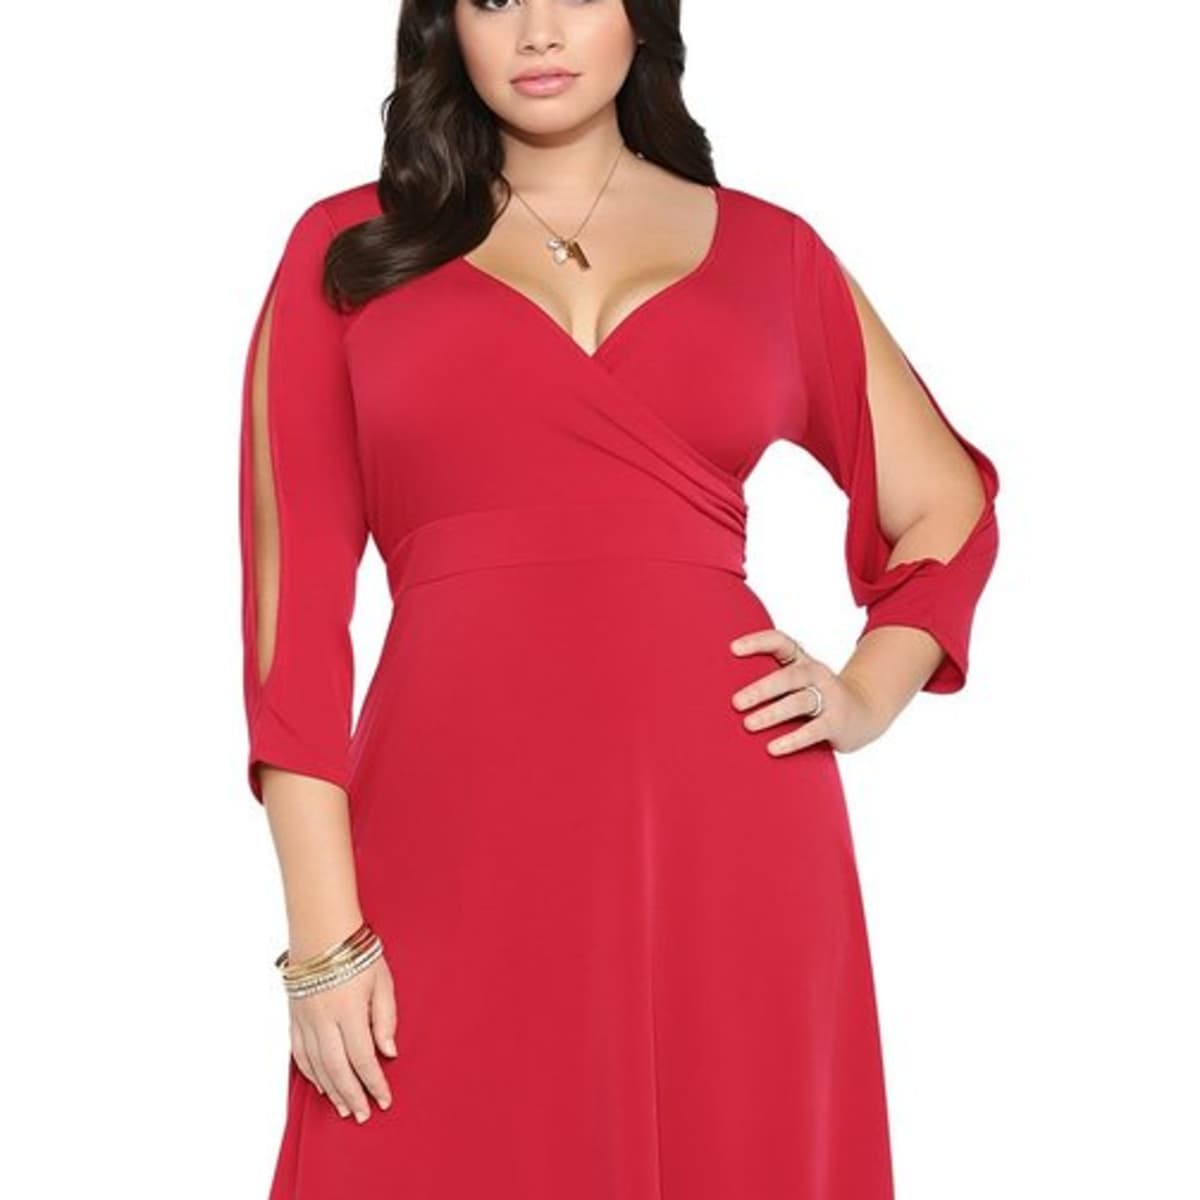 How to Choose the Perfect Red Dress for Plus Size Women - HubPages